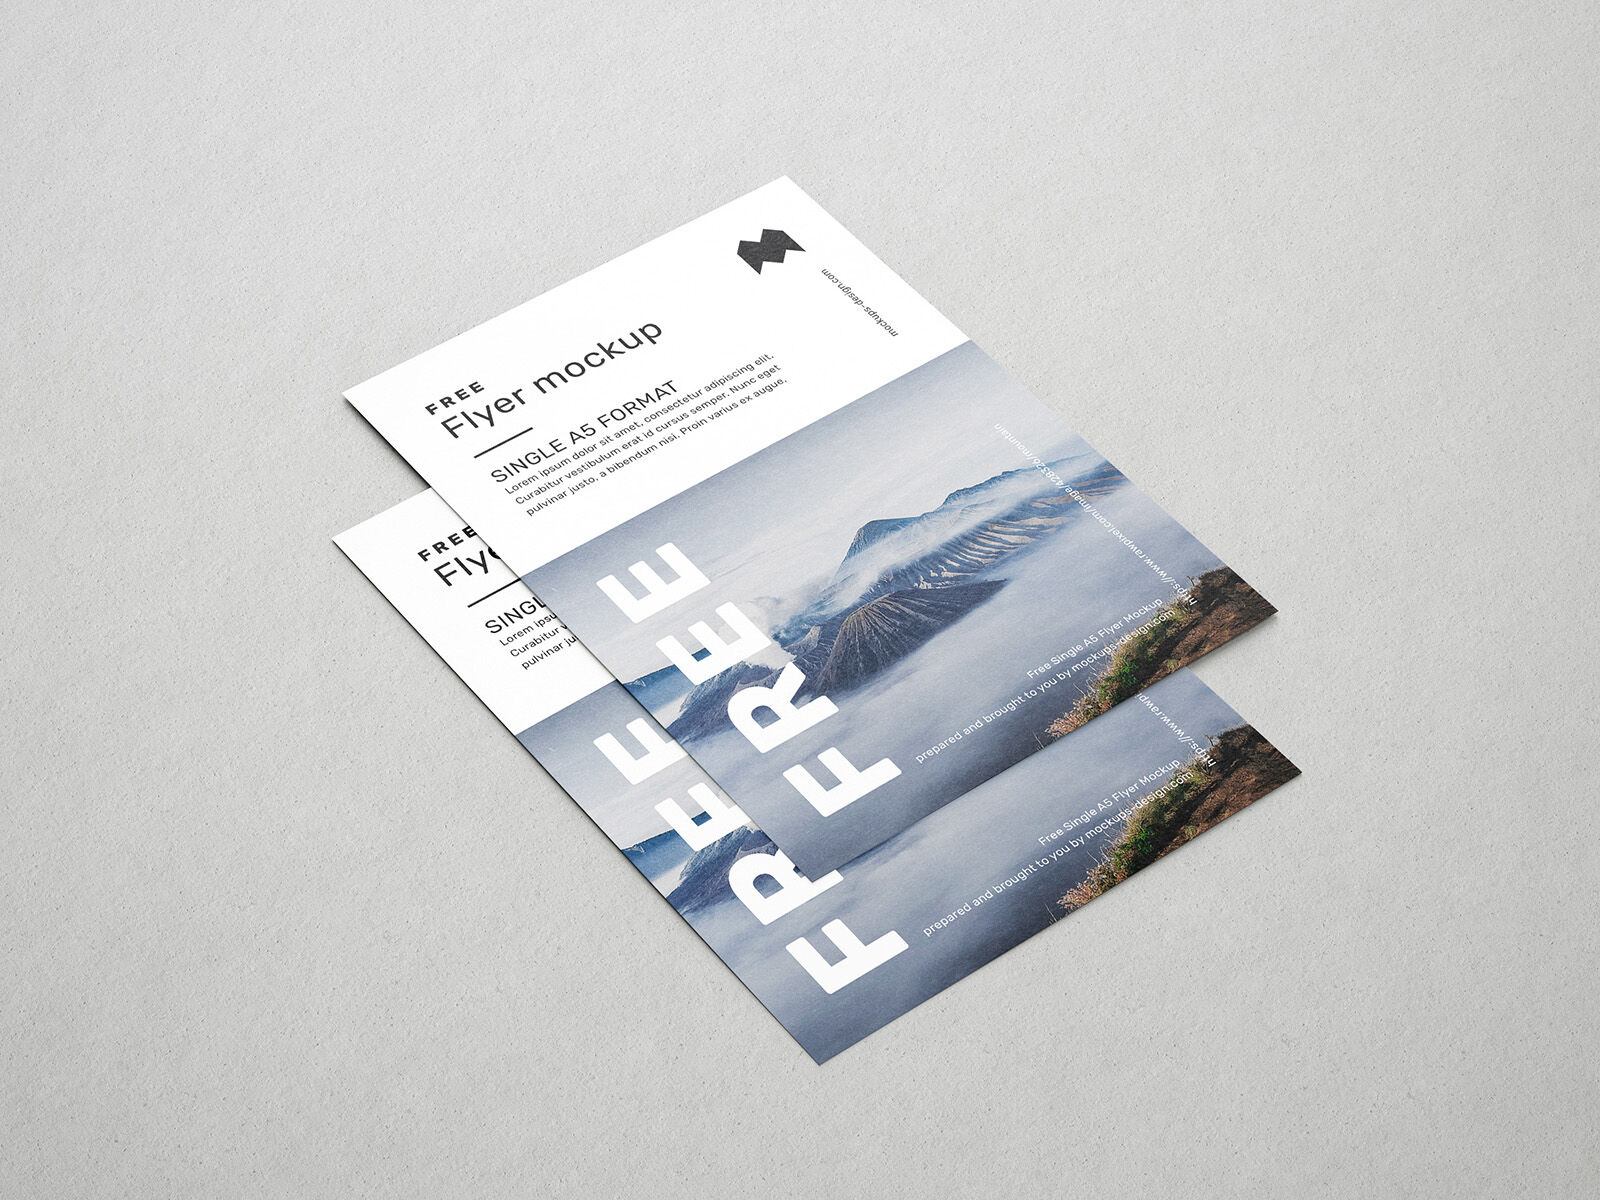 4 Mockups featuring A5 Flyers in Different Views FREE PSD